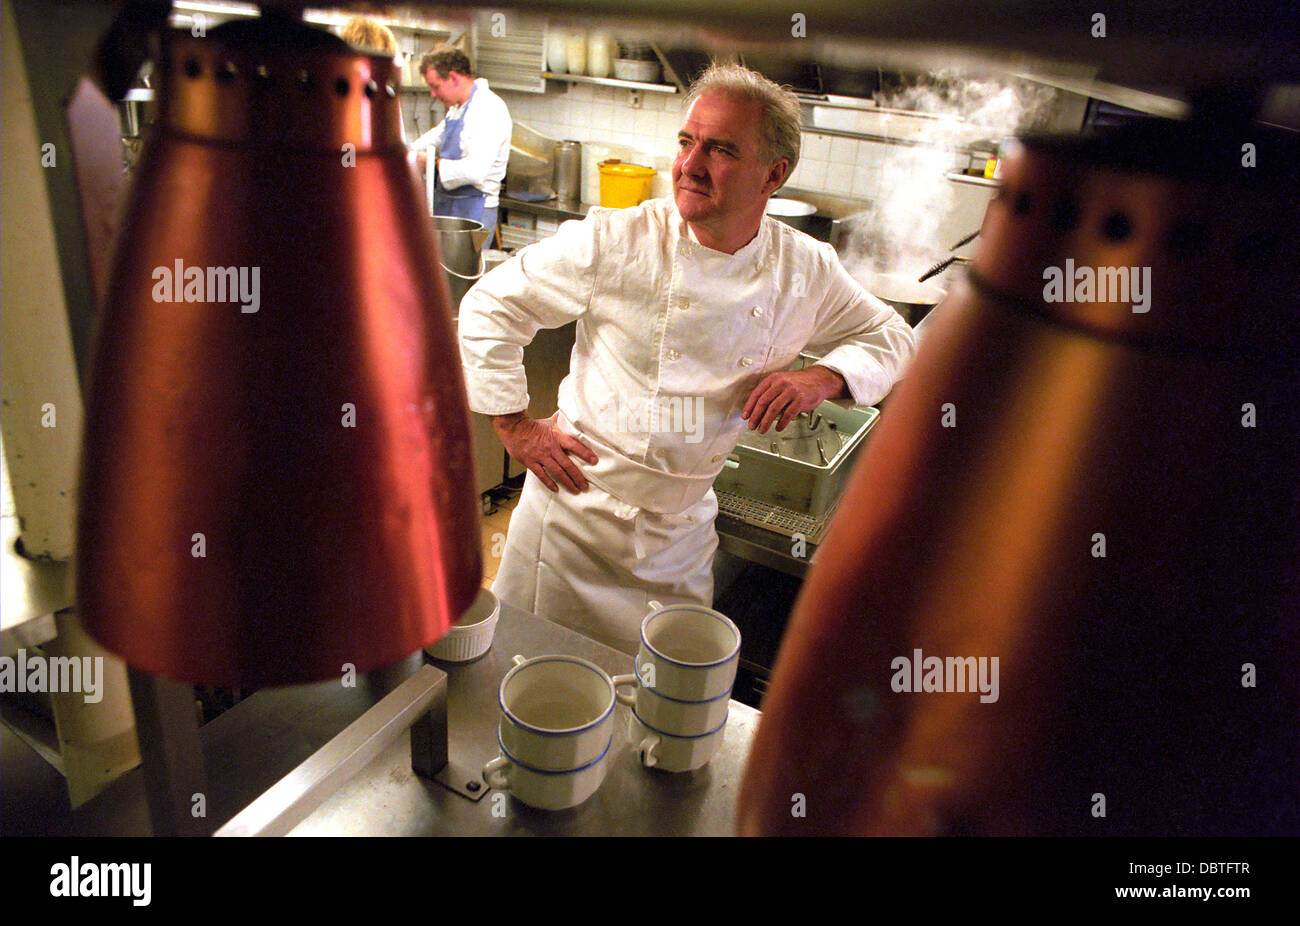 Chef Rick Stein in the kitchen of his restaurant in Padstow, Cornwall, UK. FAST FILM USED. Stock Photo